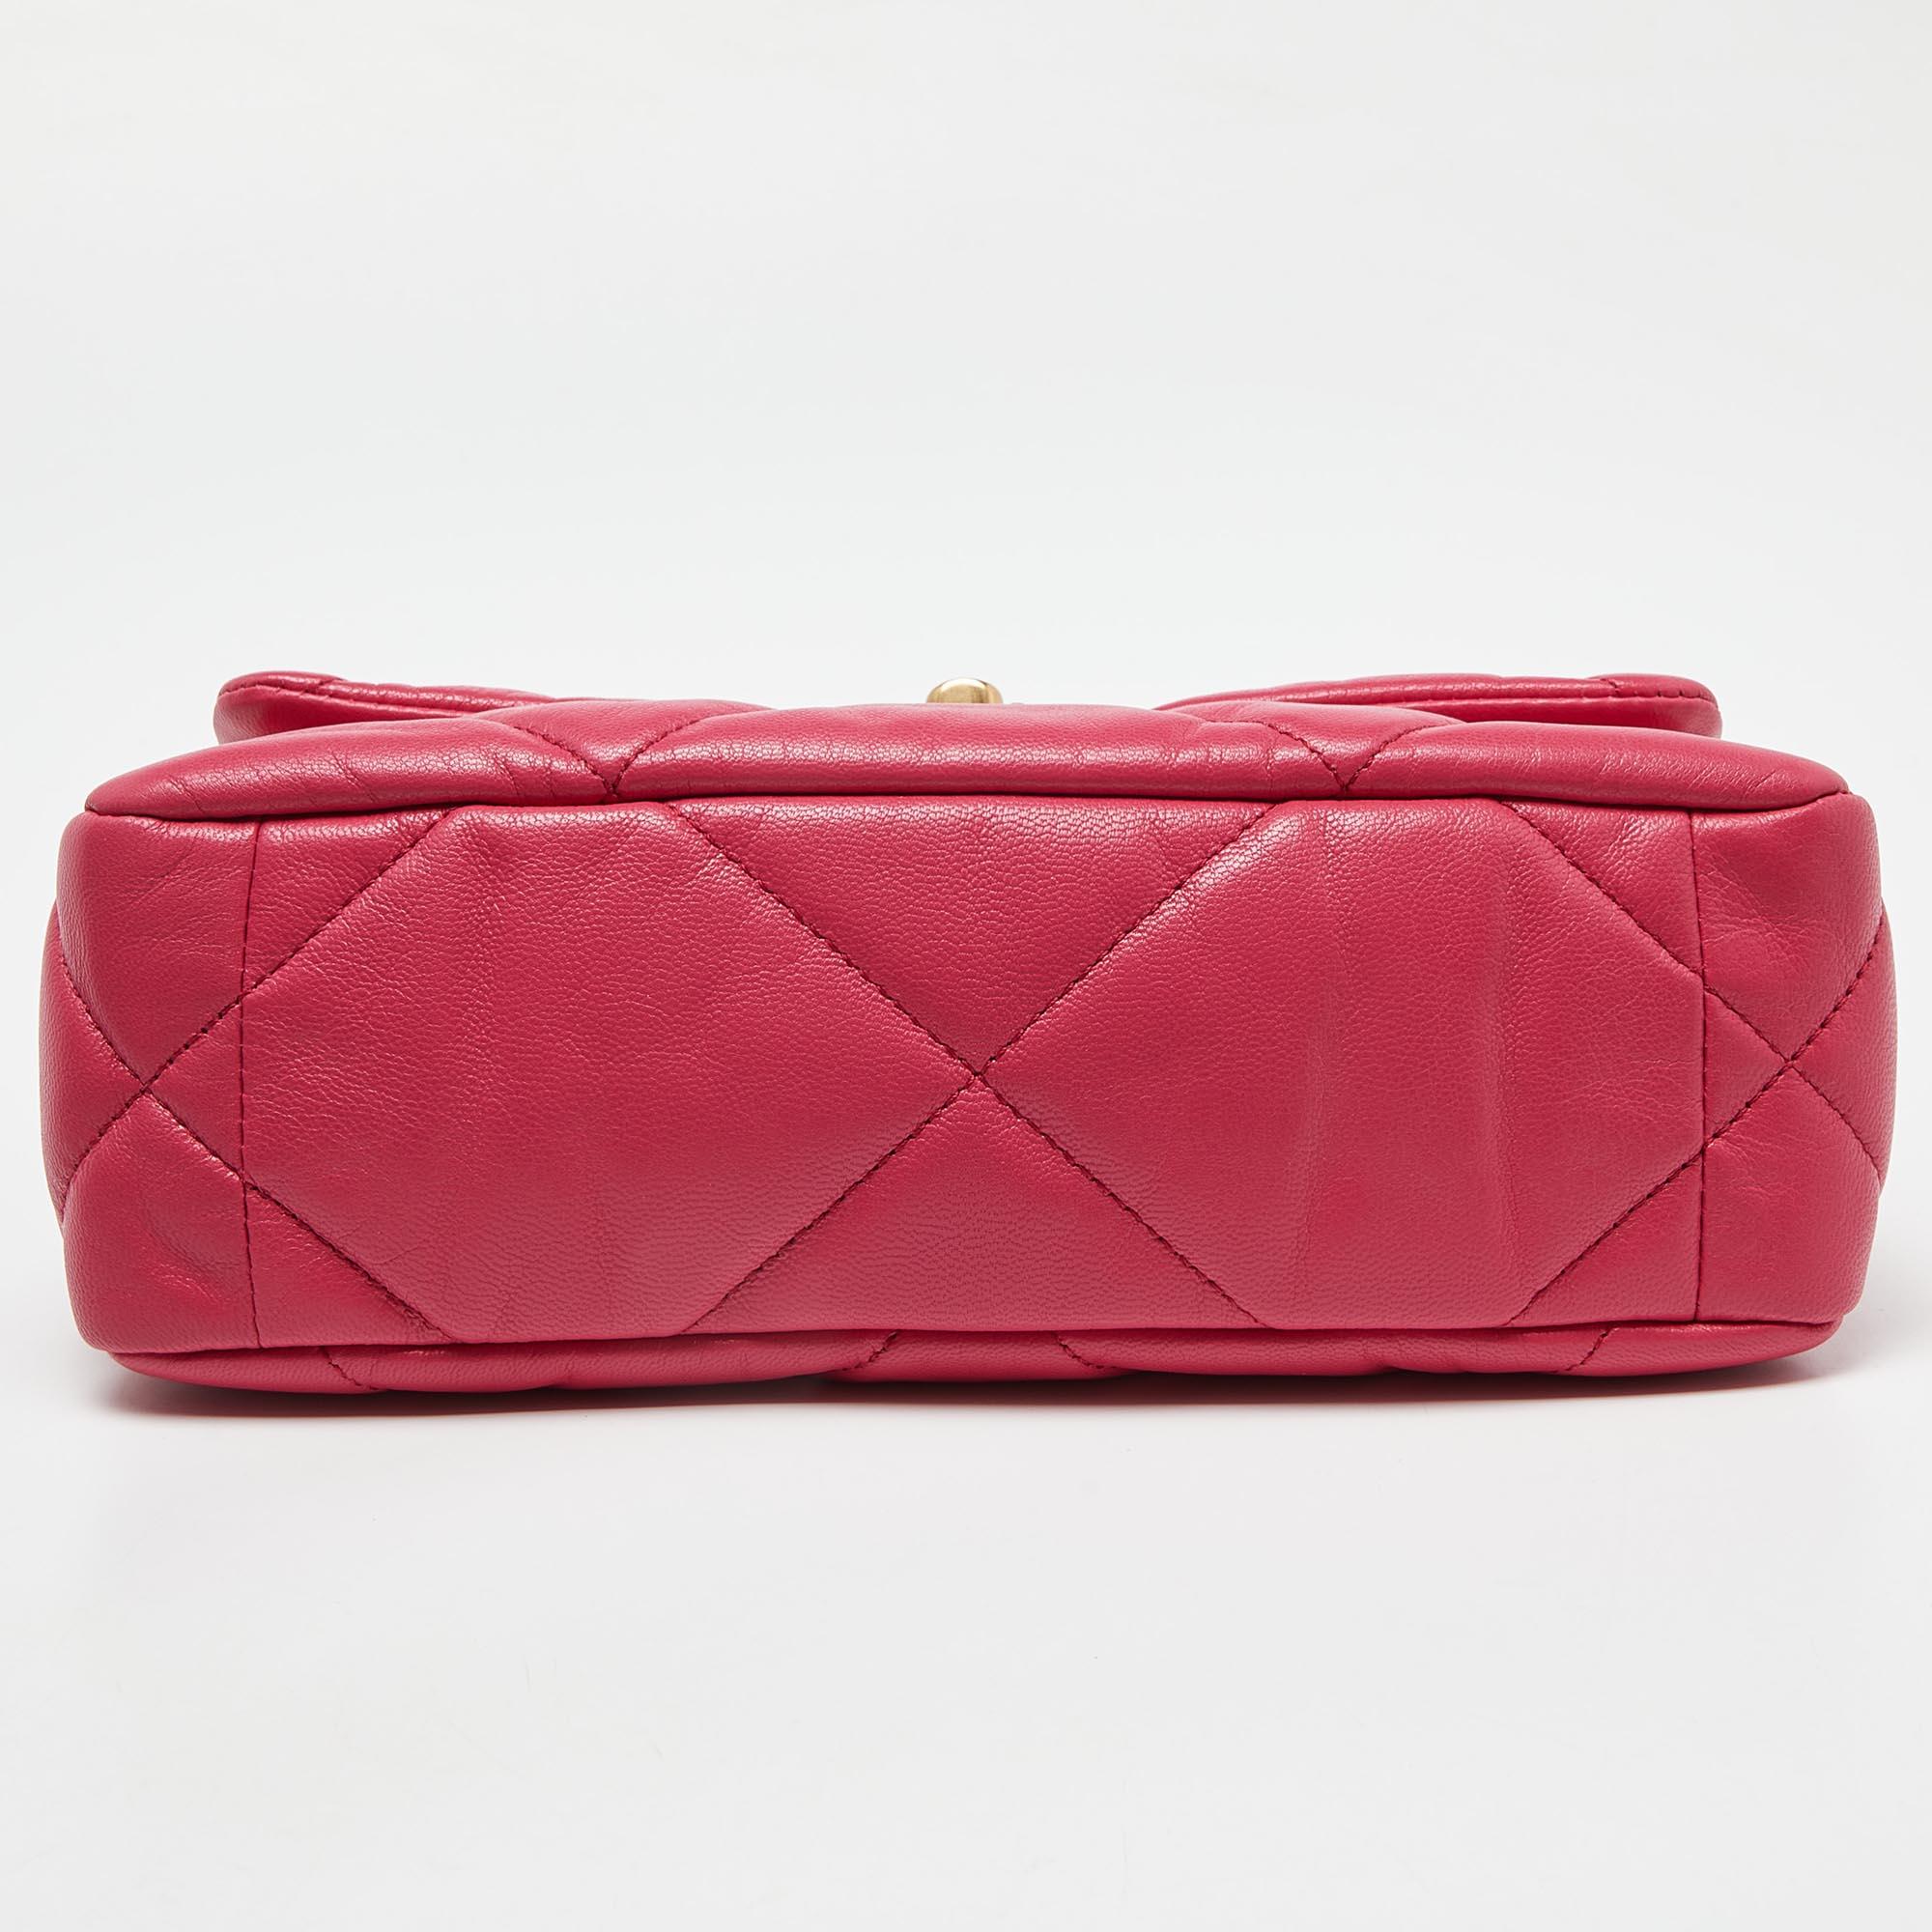 Chanel Pink Quilted Leather Medium 19 Flap Top Handle Bag 1